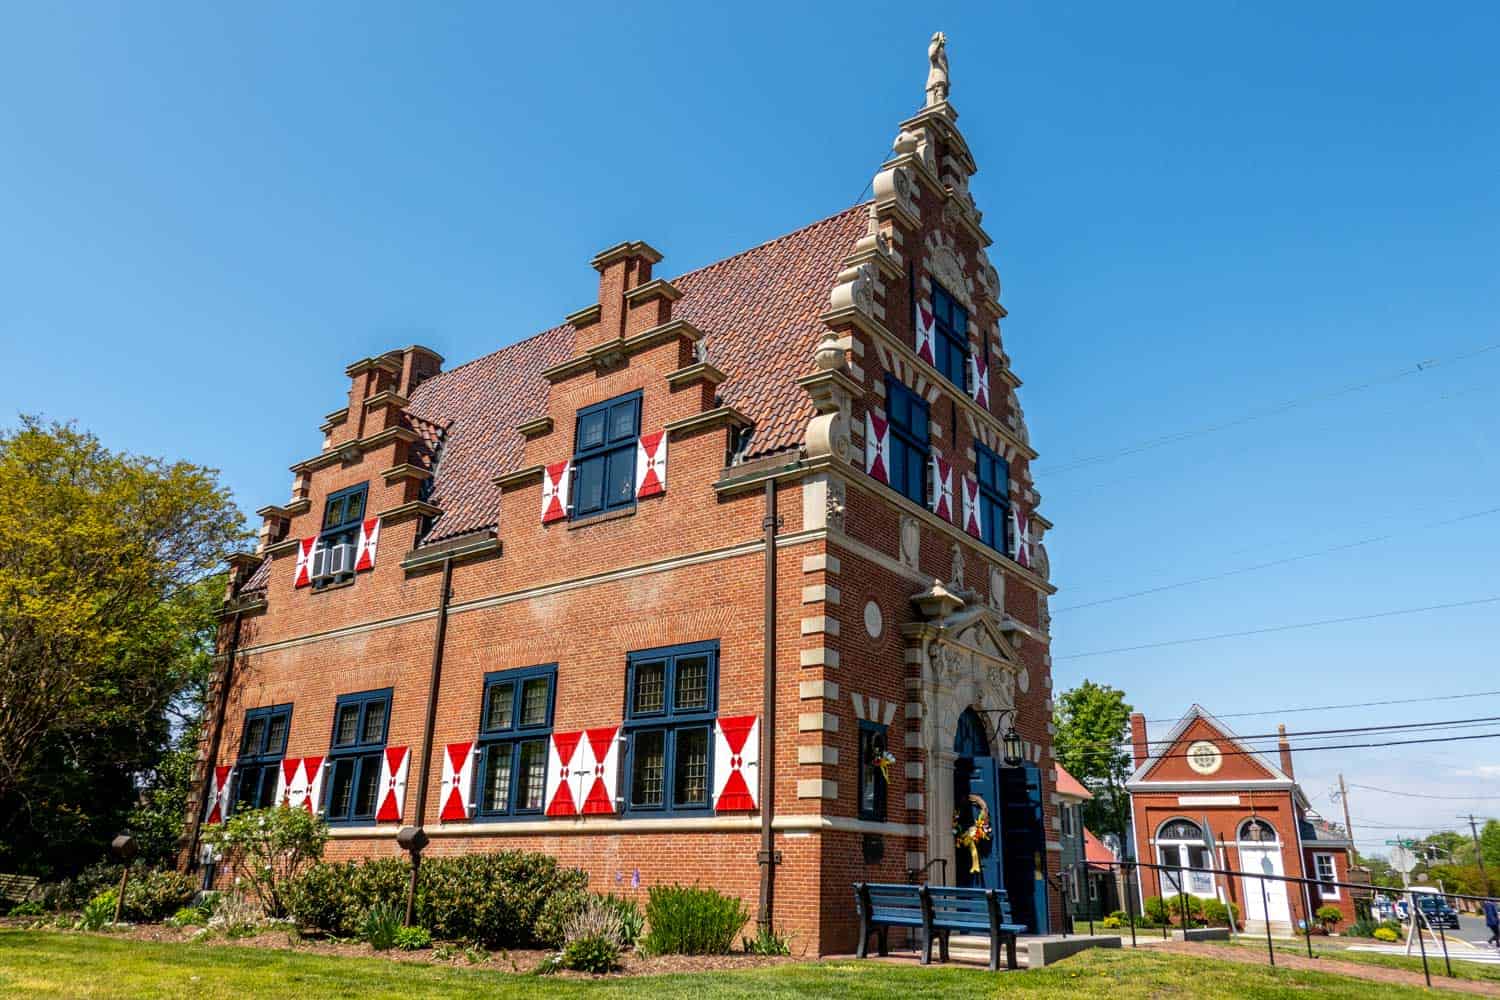 Building with red and white shutters and Dutch architecture details